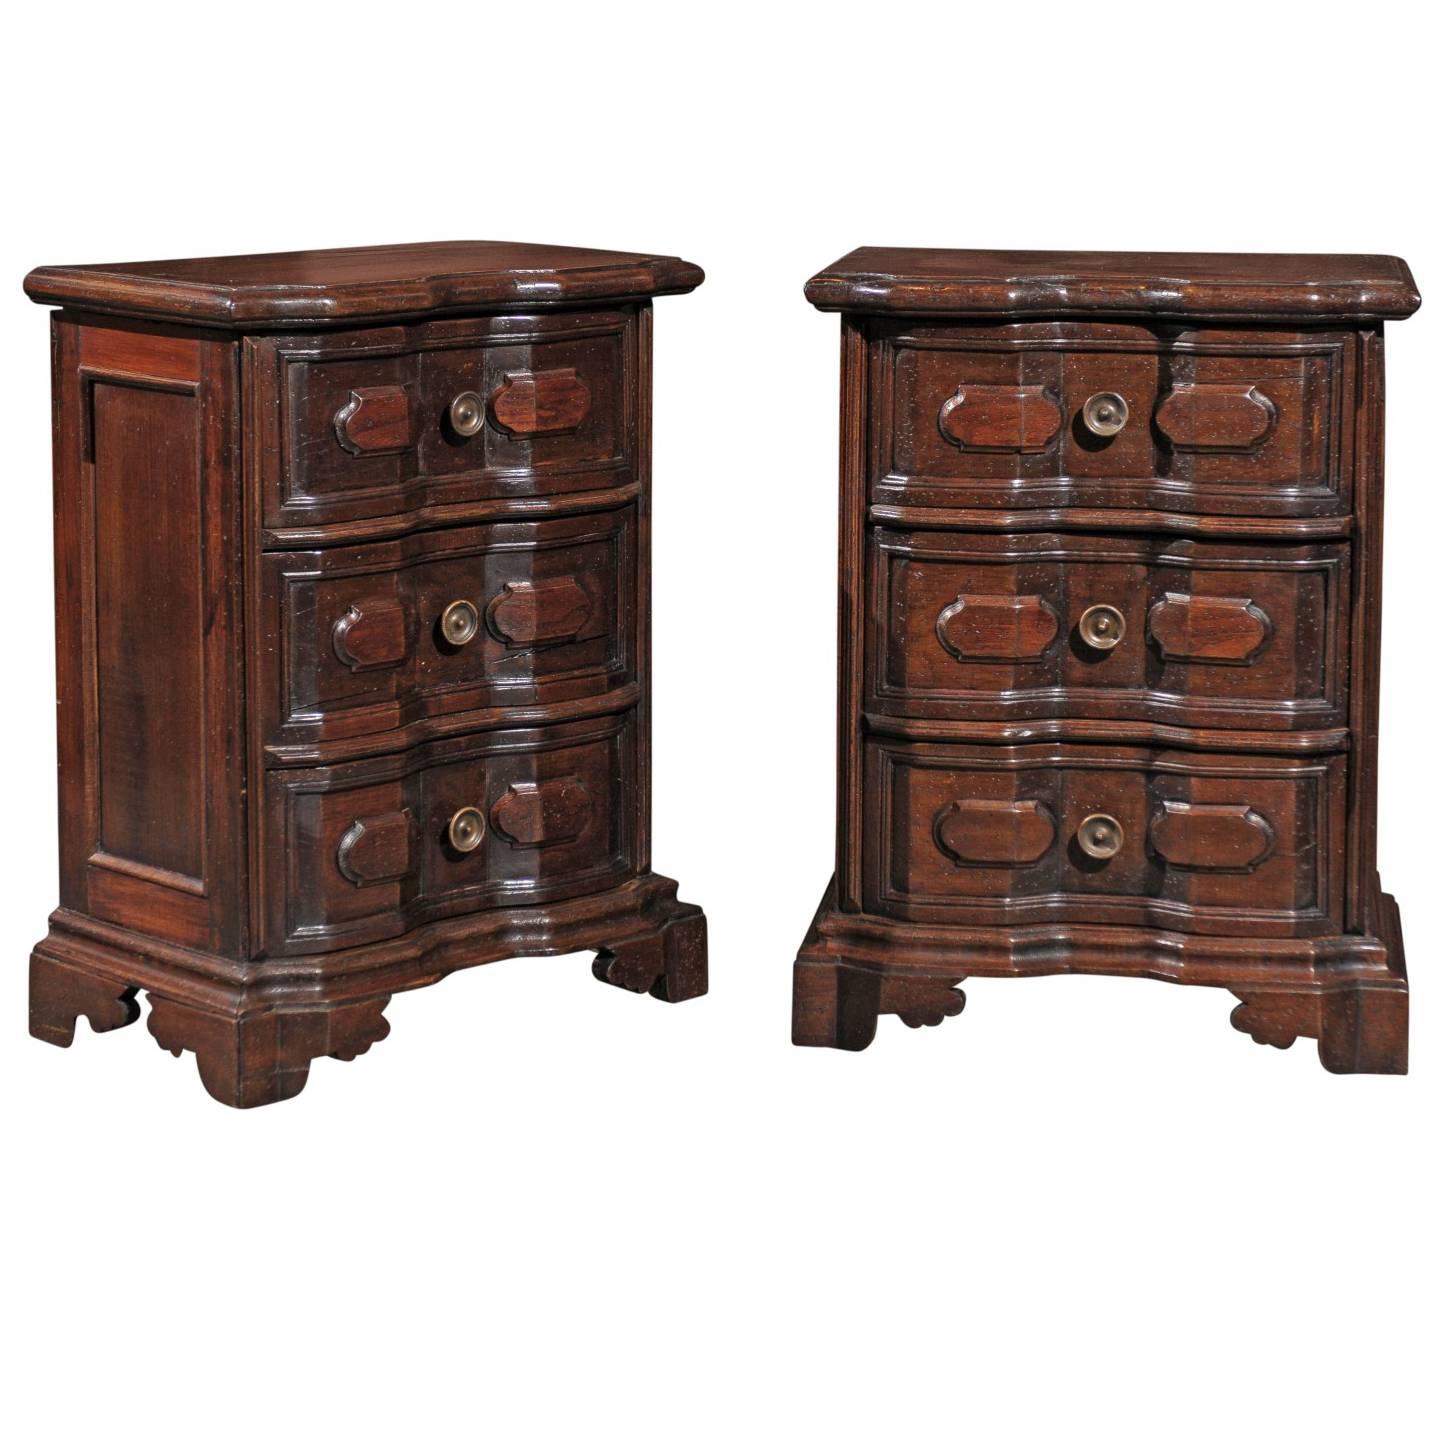 Pair of Petite Italian Commodes with Crossbow Profile and Drawers from the 1930s